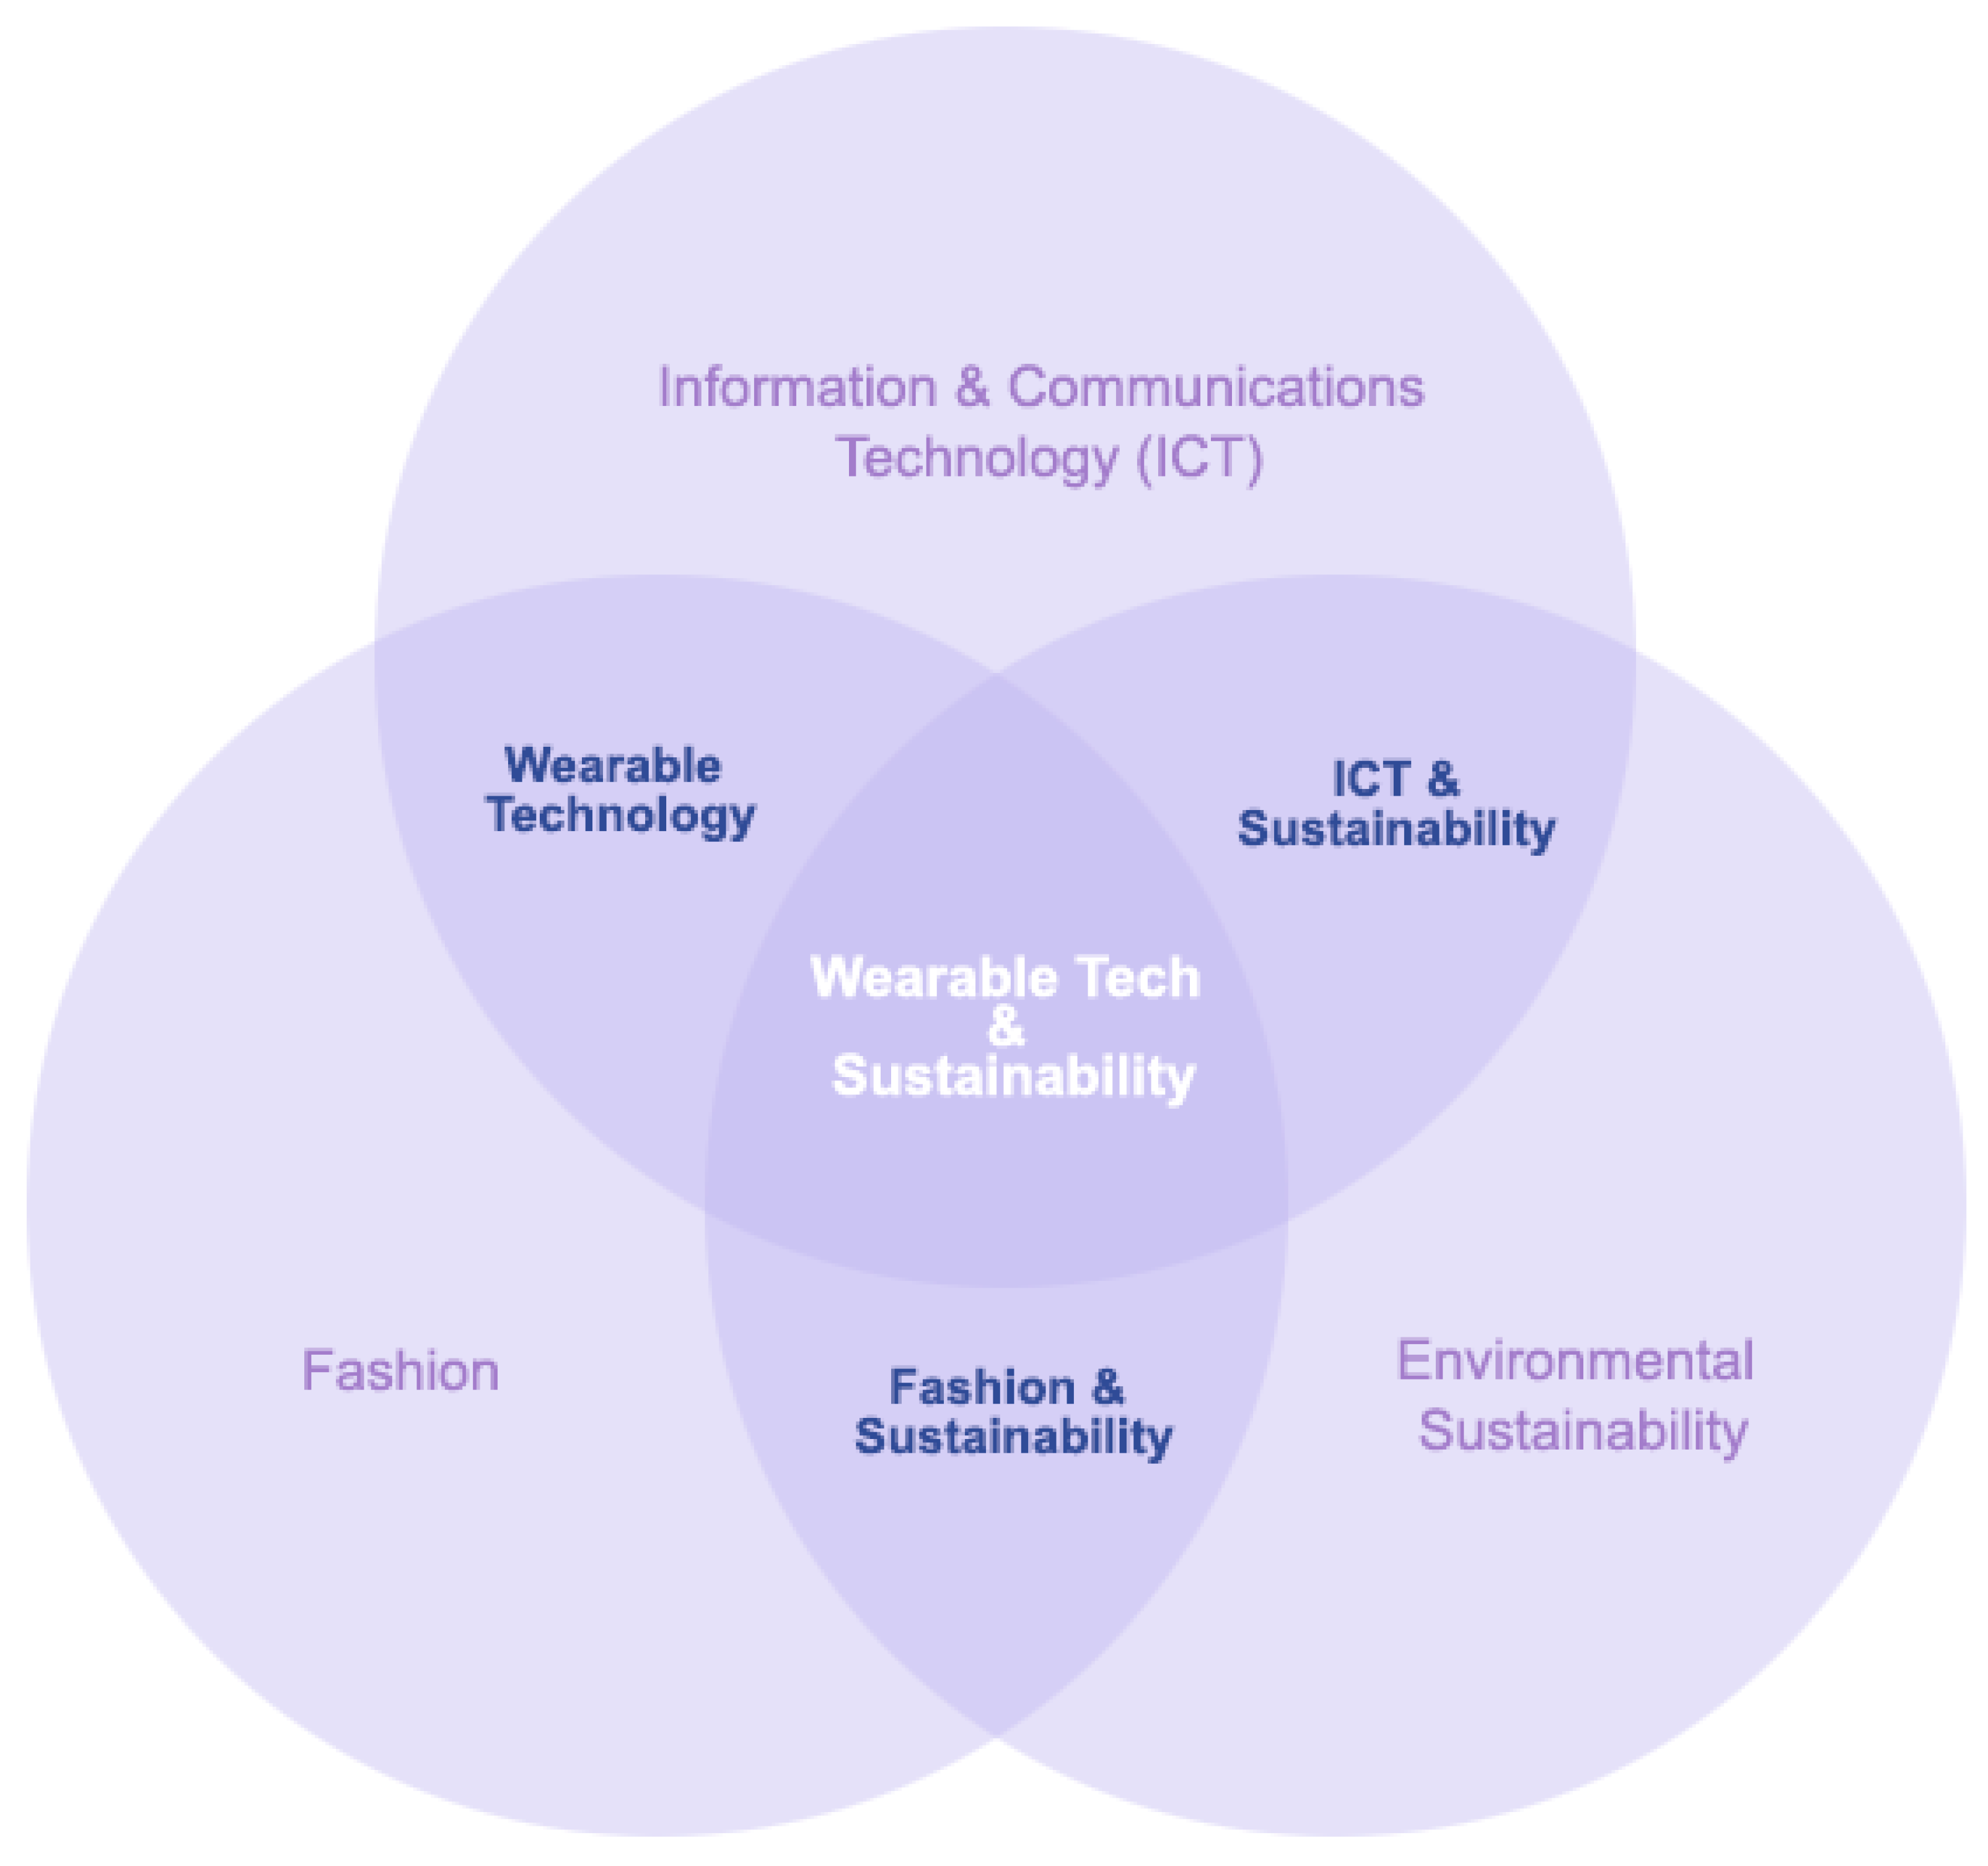 Wearable Technology: transforming the nature of communication